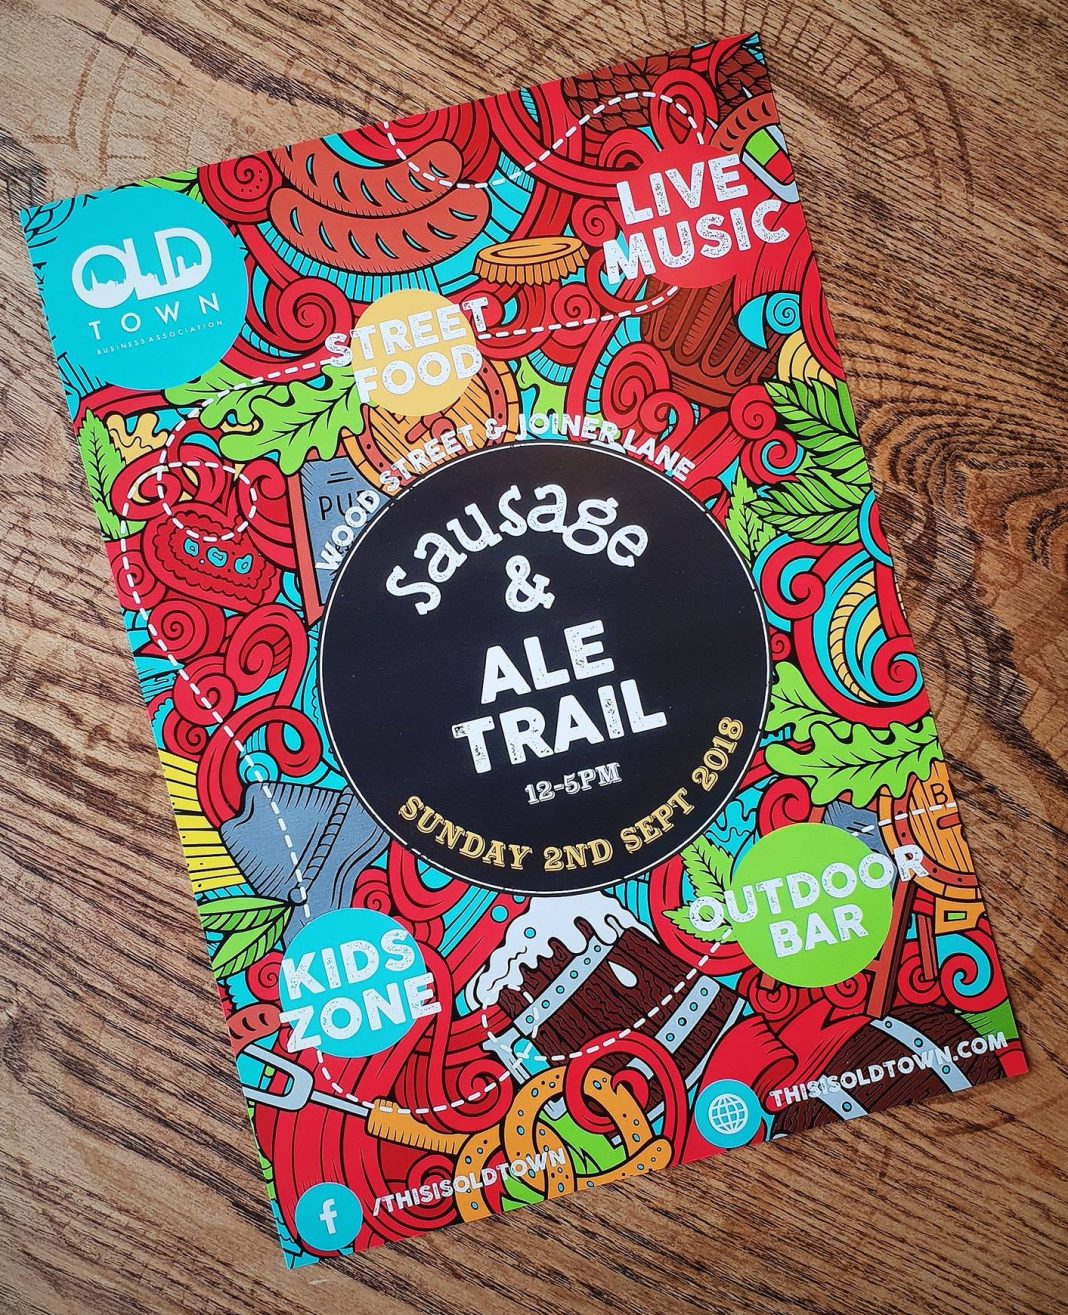 Old Town Sausage & Ale Trail 2018